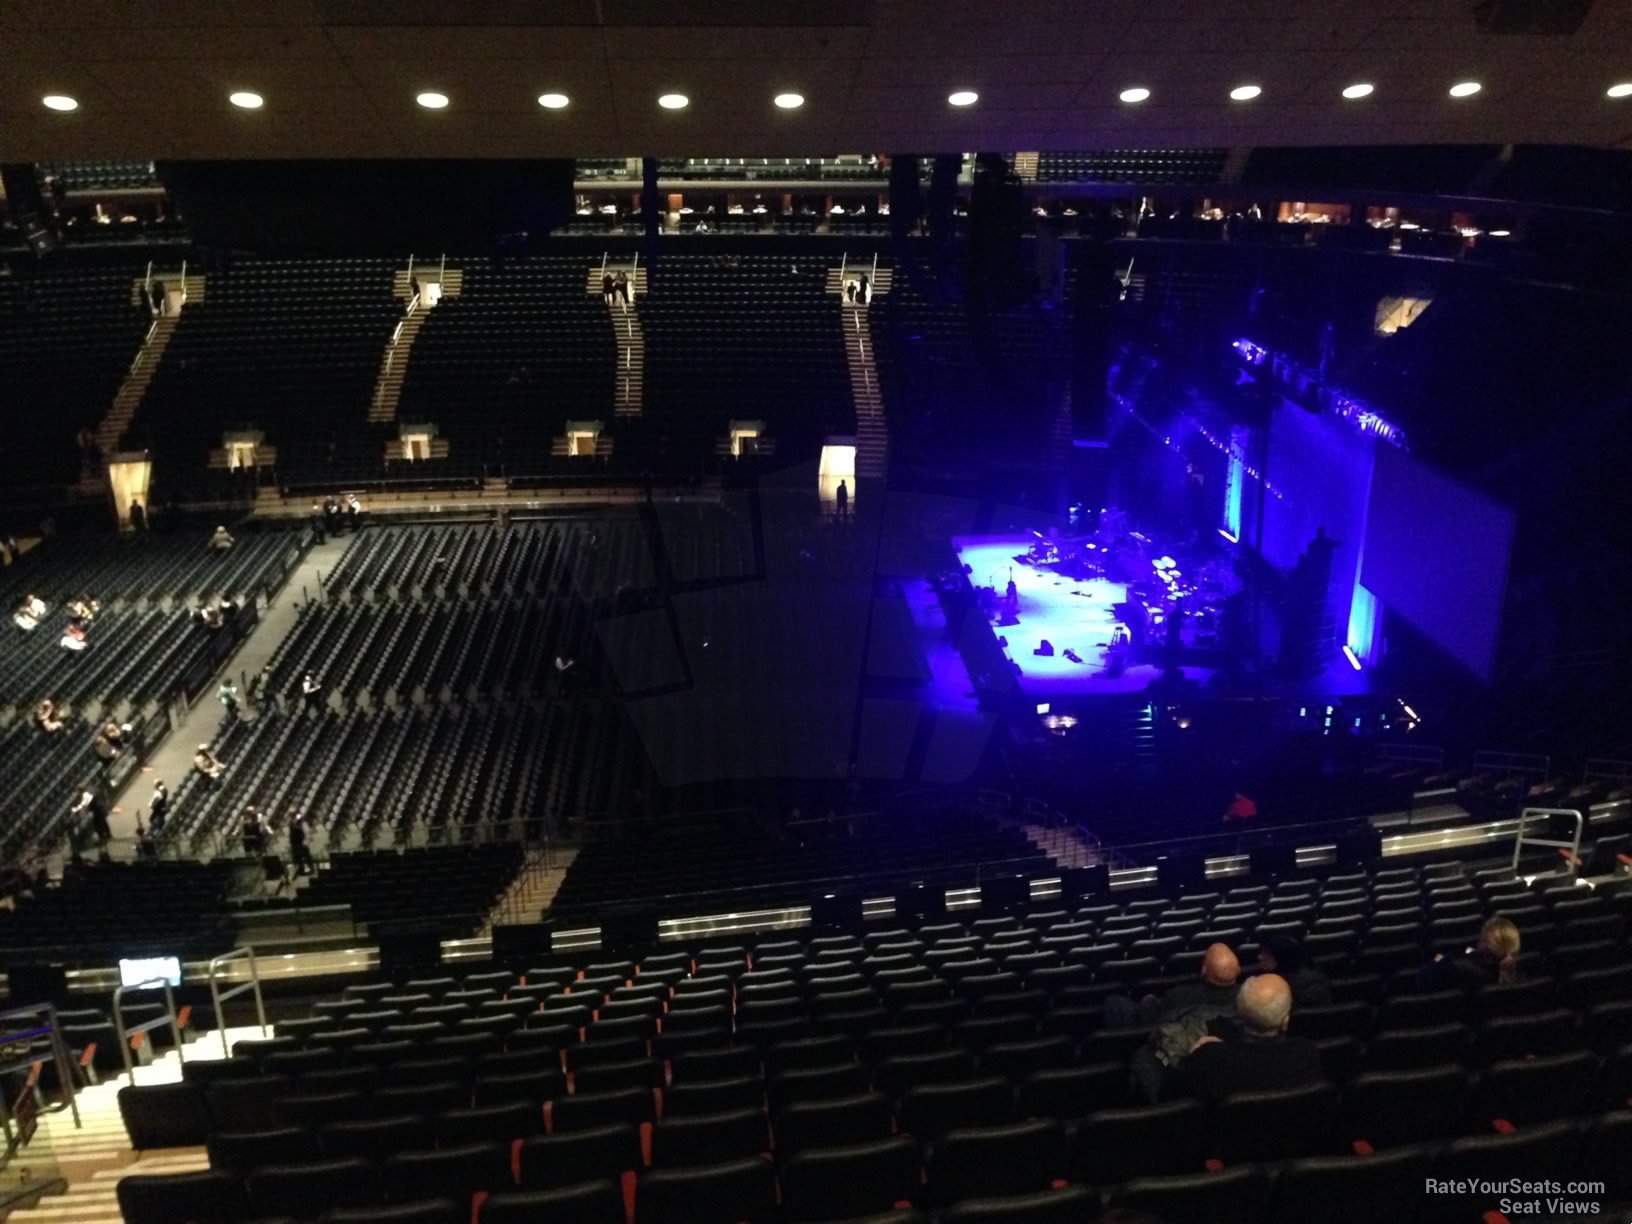 section 212, row 16 seat view  for concert - madison square garden